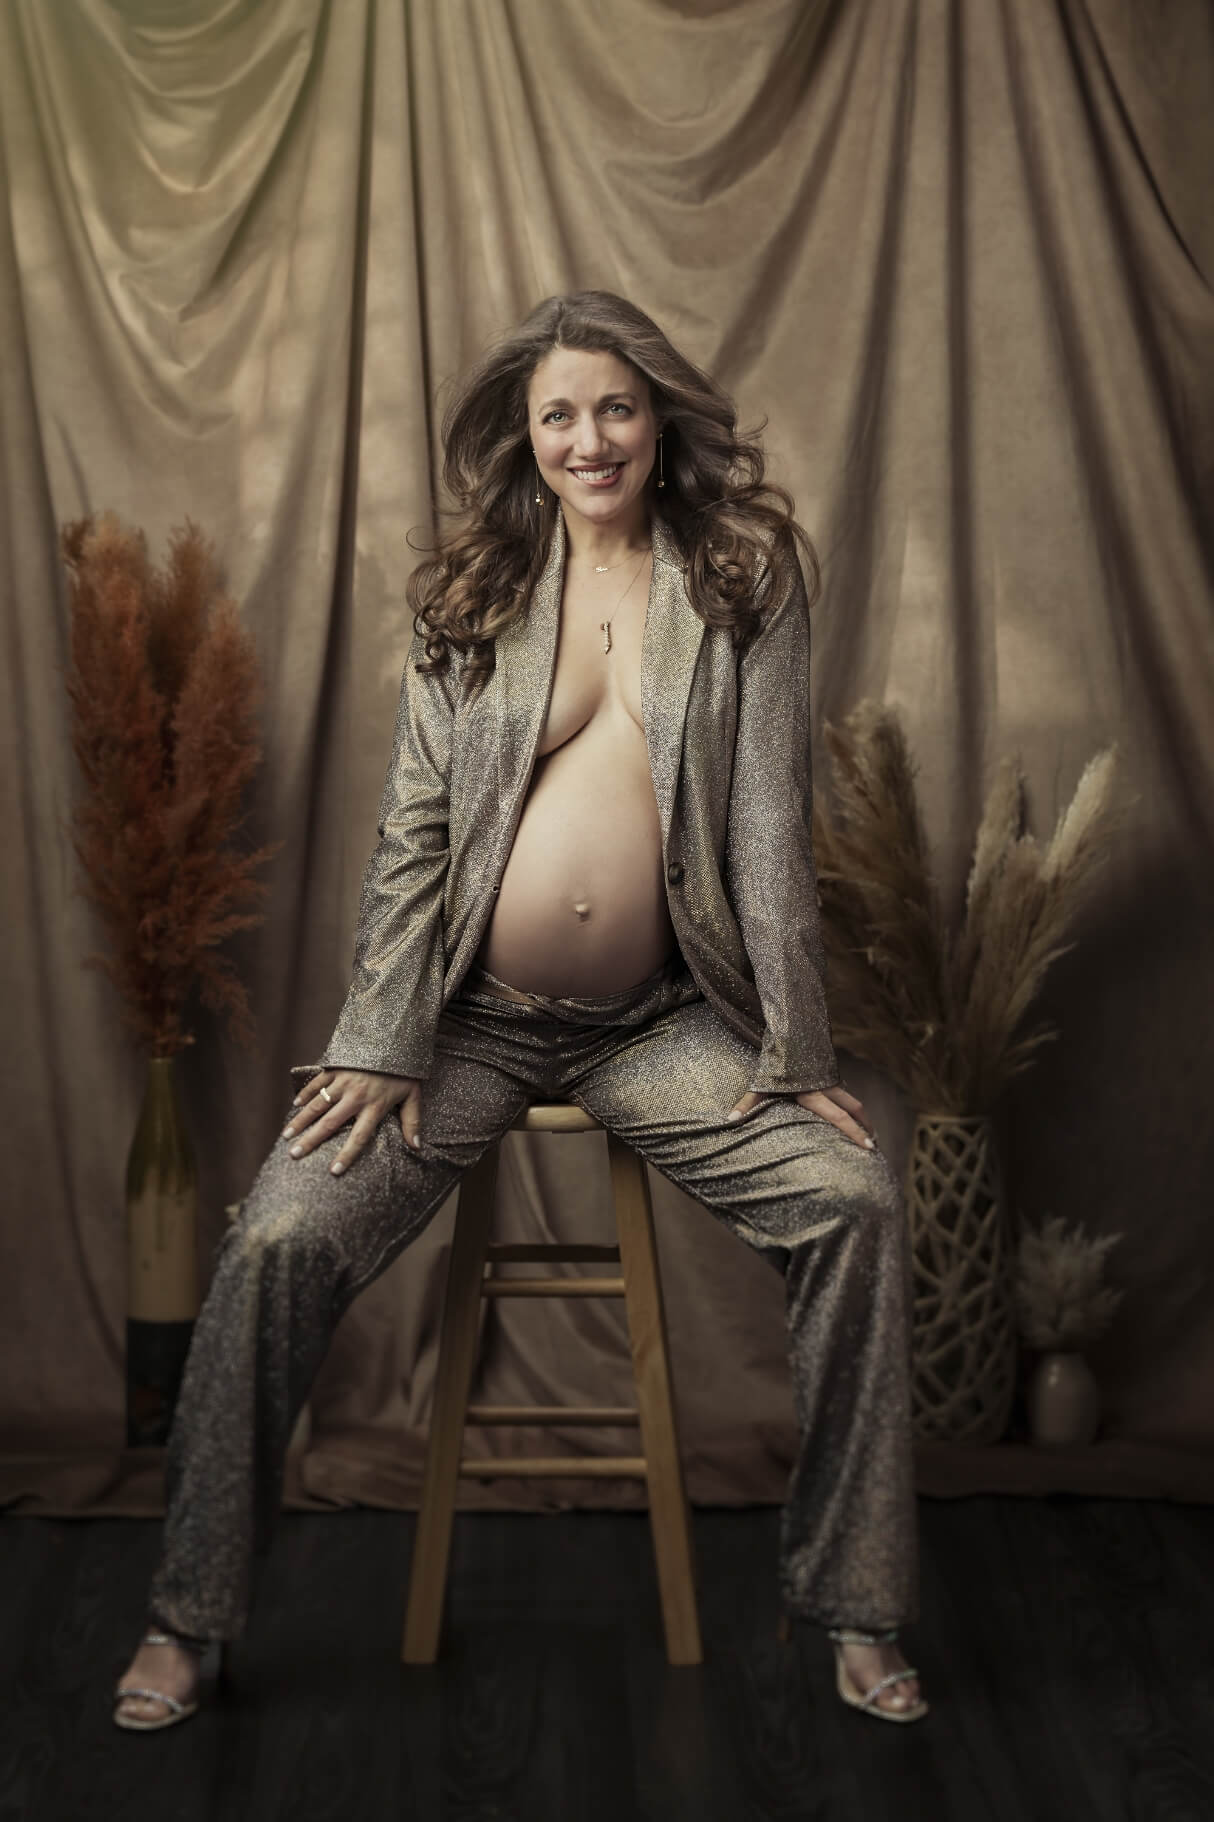 Book a Maternity session with Christina Kramer Portrait and get 50% off a Newborn Photography session.